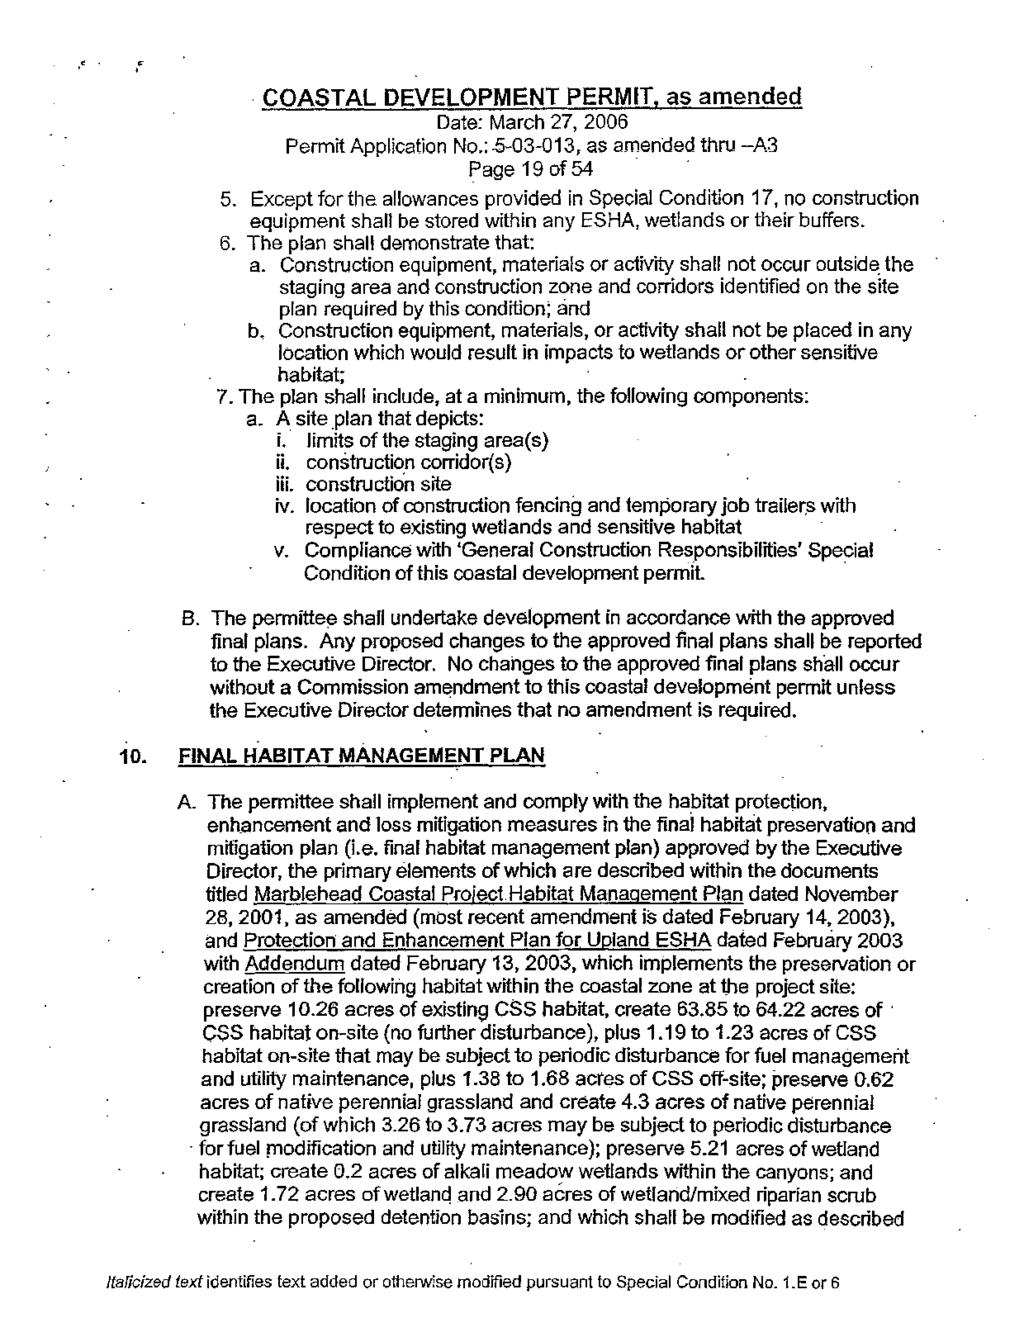 ~. COASTAL DEVELOPMENT PERMIT, as amended Date: March 27, 2006 Permit Application No.:.5-03-013, as amended thru -A3 Page 19 of 54. 5. Except for the.